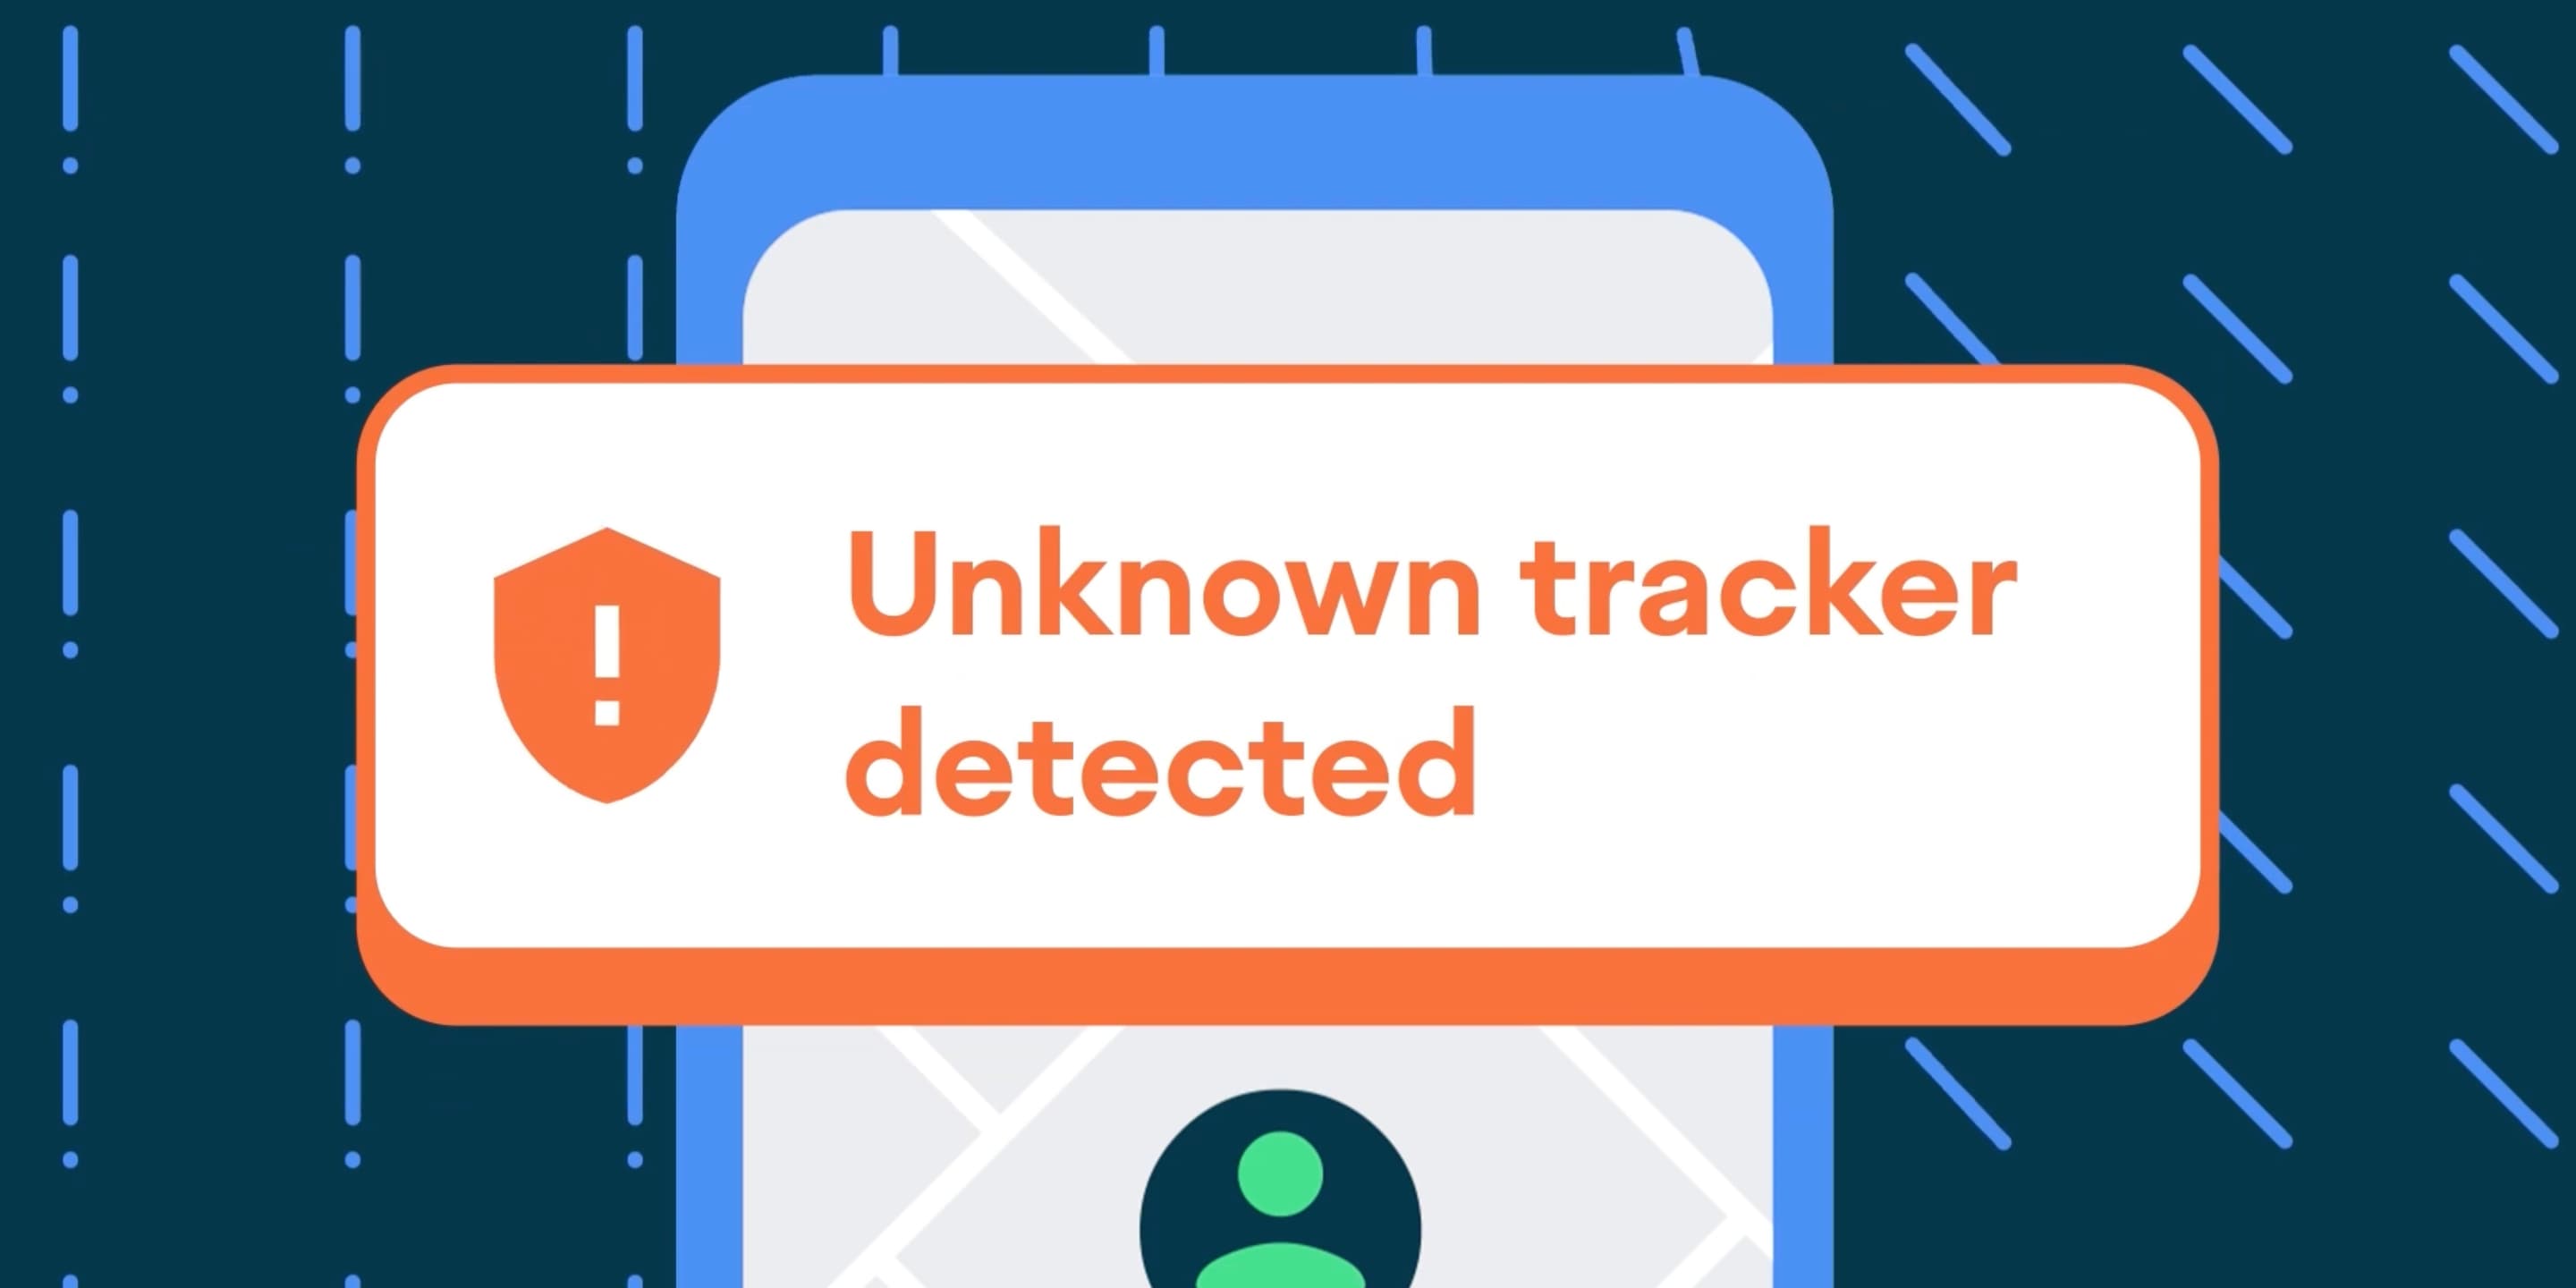 Android rolling out unknown tracker alerts to find AirTags